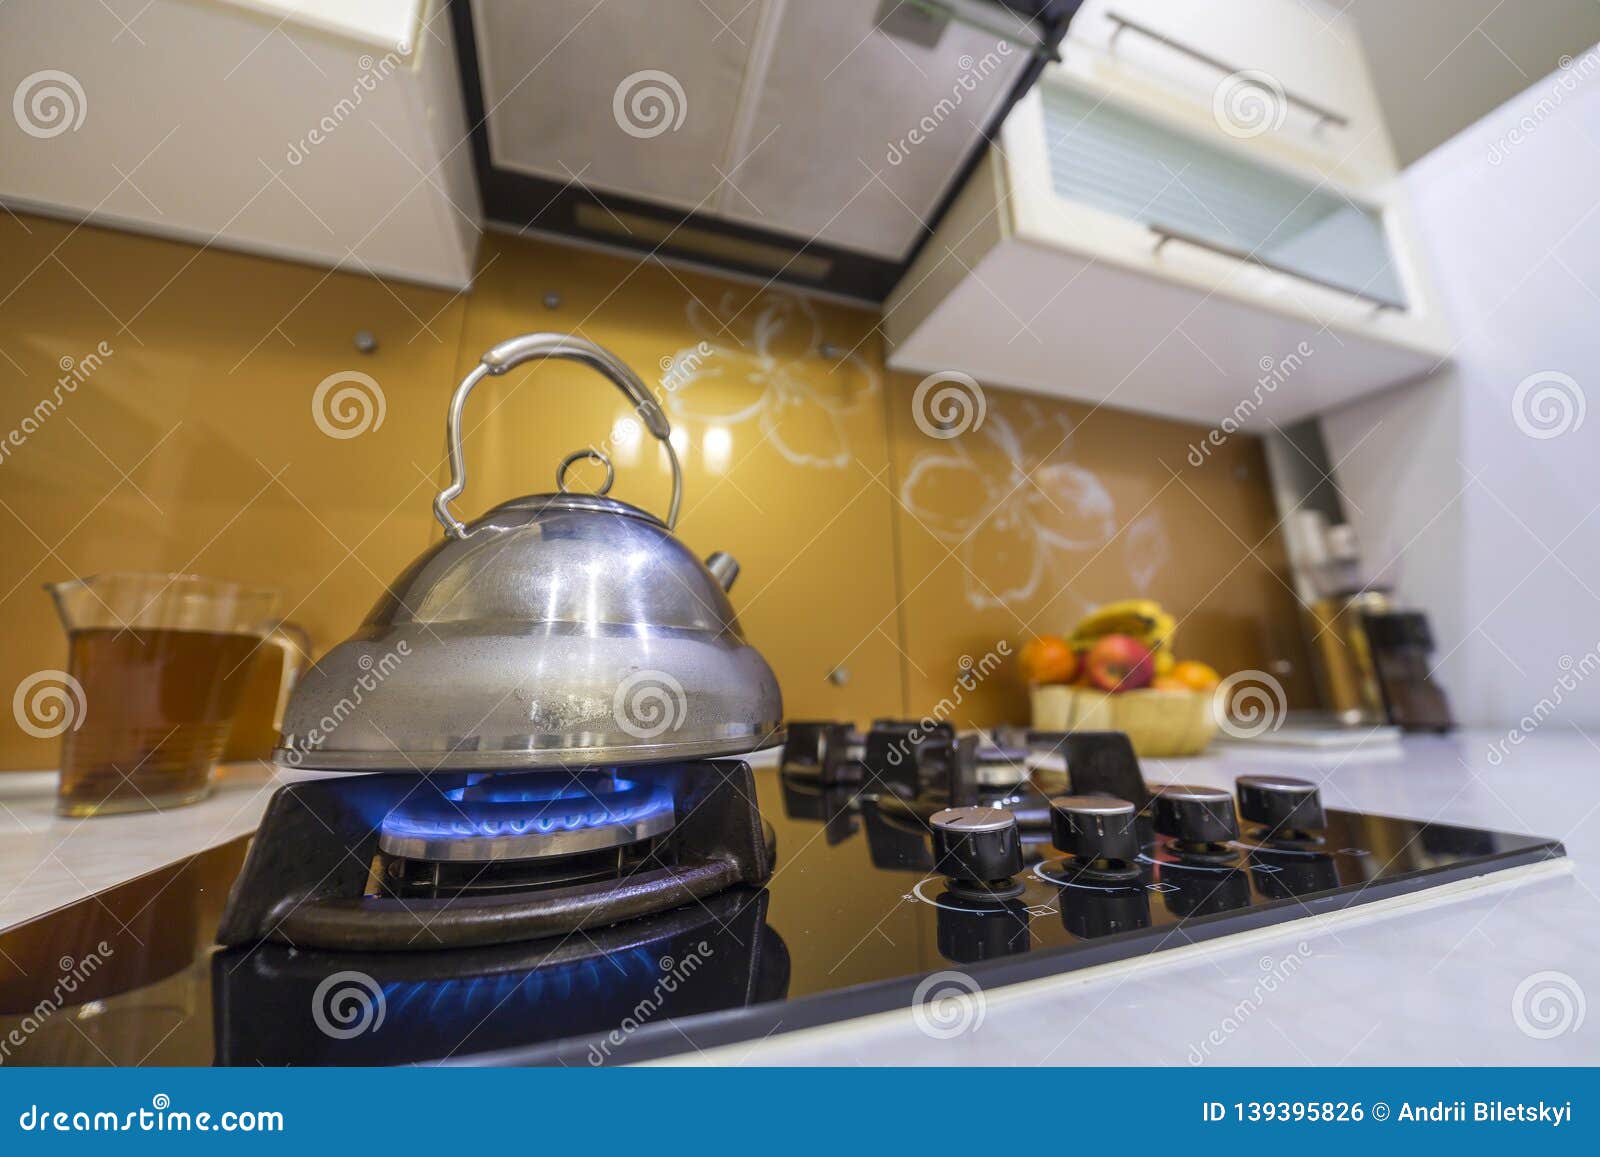 https://thumbs.dreamstime.com/z/shiny-stainless-tea-kettle-teapot-boiling-water-burning-gas-stove-modern-kitchen-yellow-interior-background-shiny-139395826.jpg